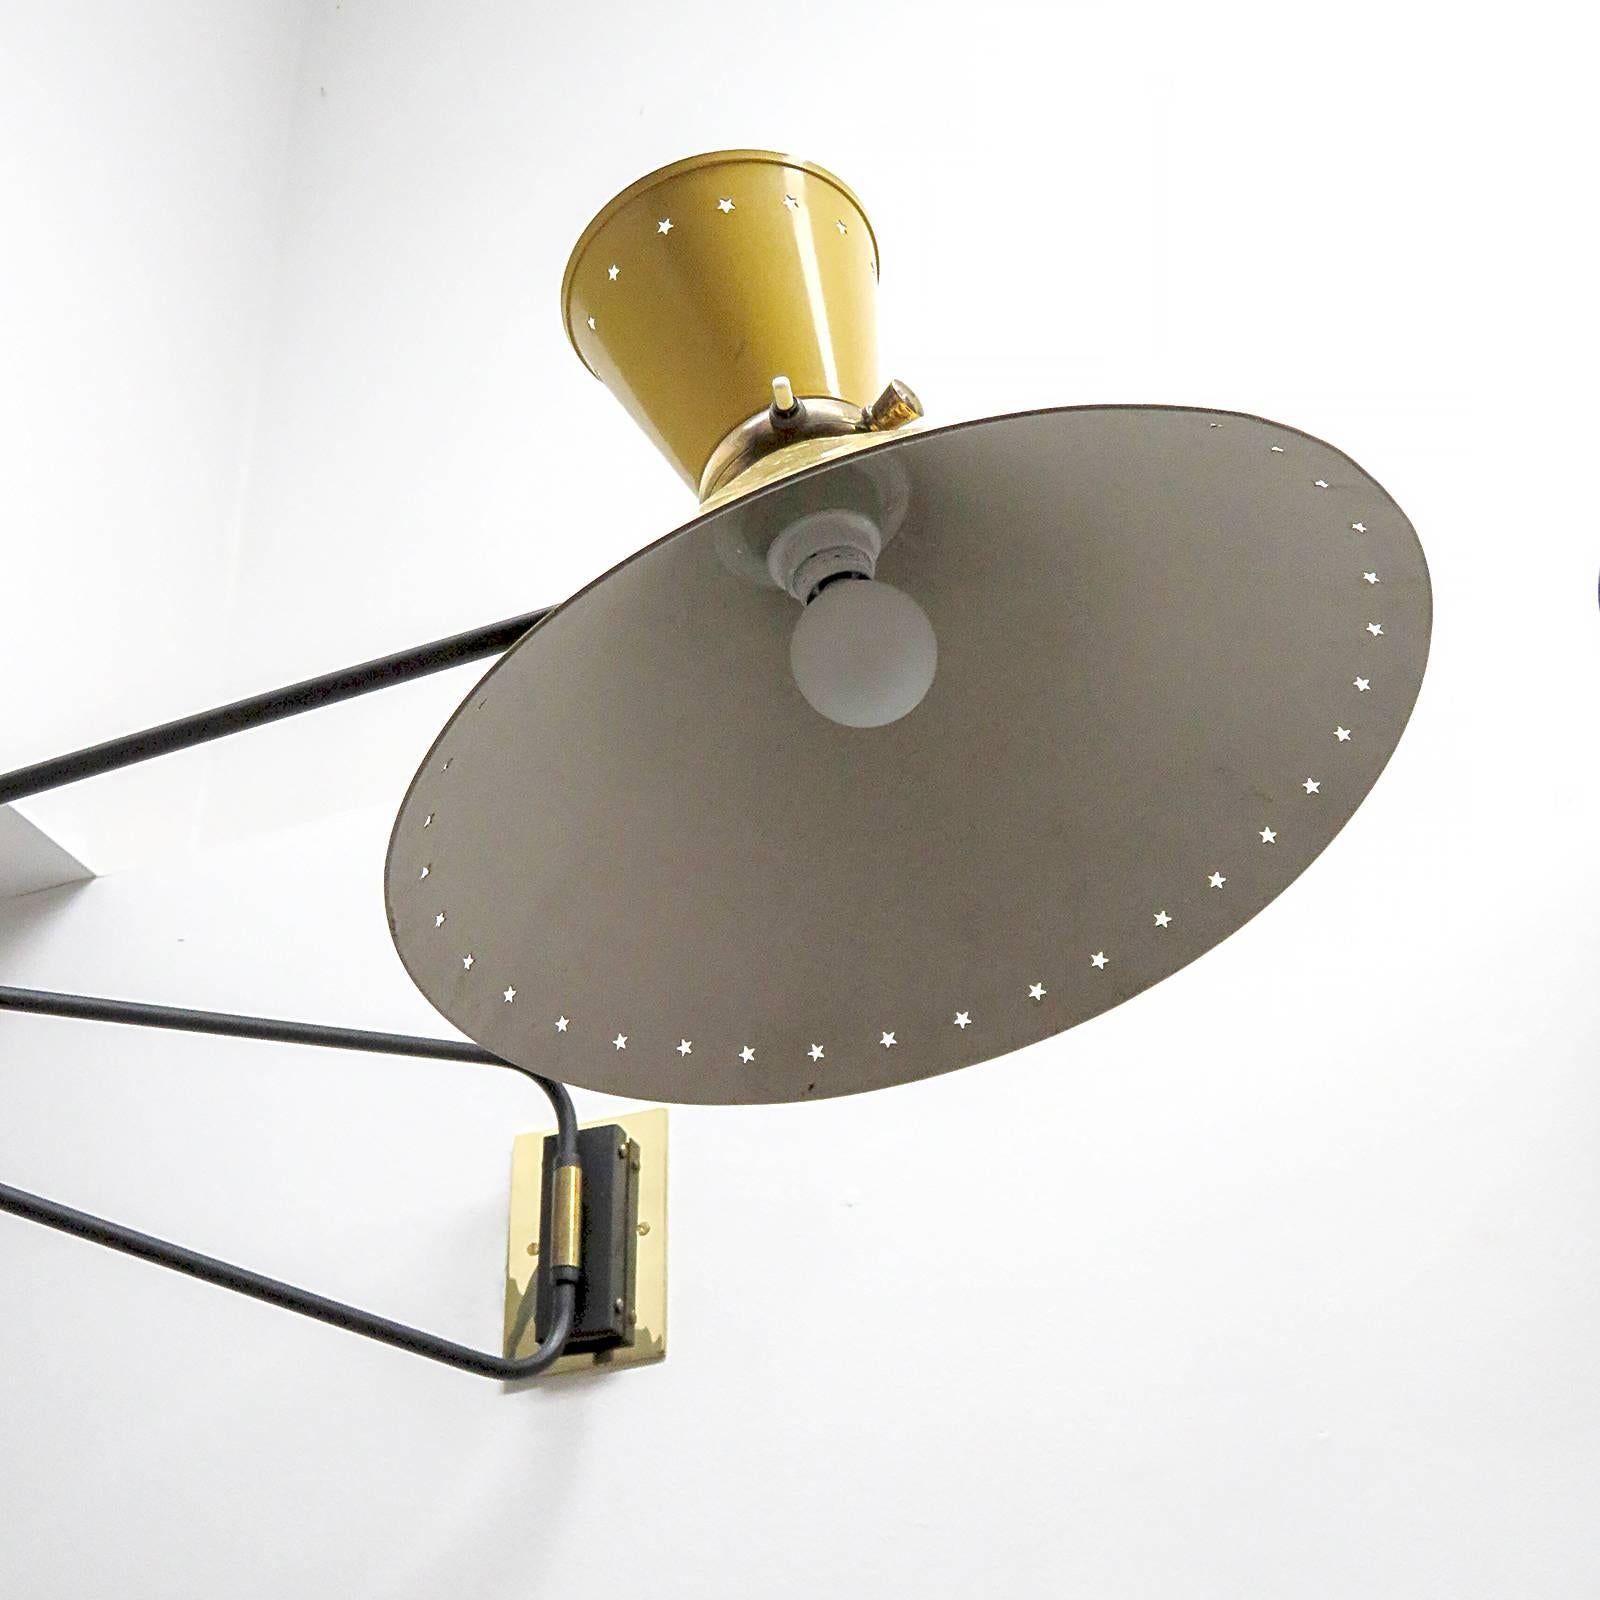 Enameled French Swing Arm Wall Light by Rene Mathieu for Lunel, 1950s